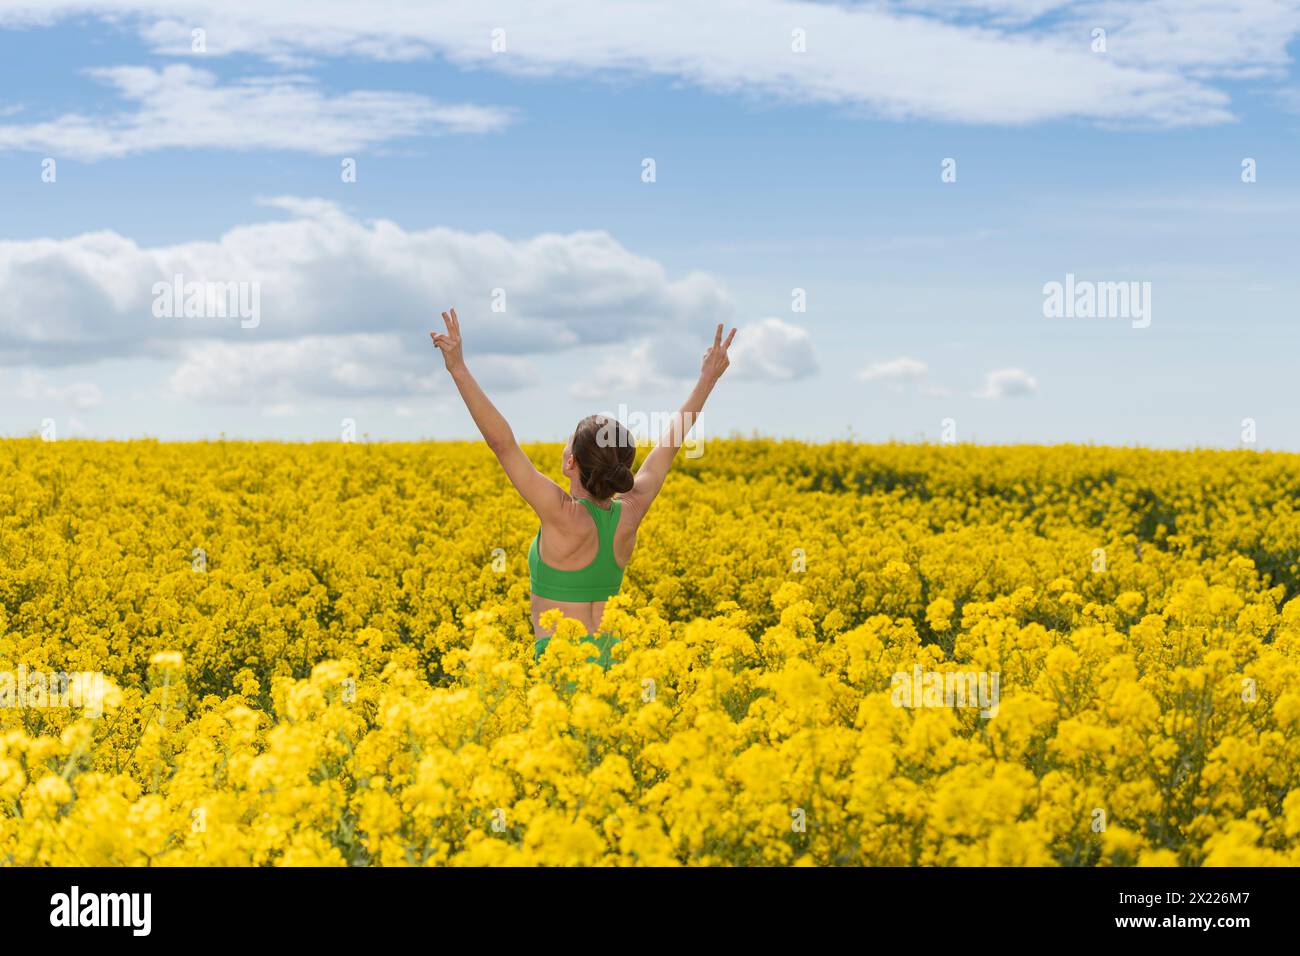 Sporty woman with arms raised in celebration and enjoying the sun in a yellow rapeseed field Stock Photo